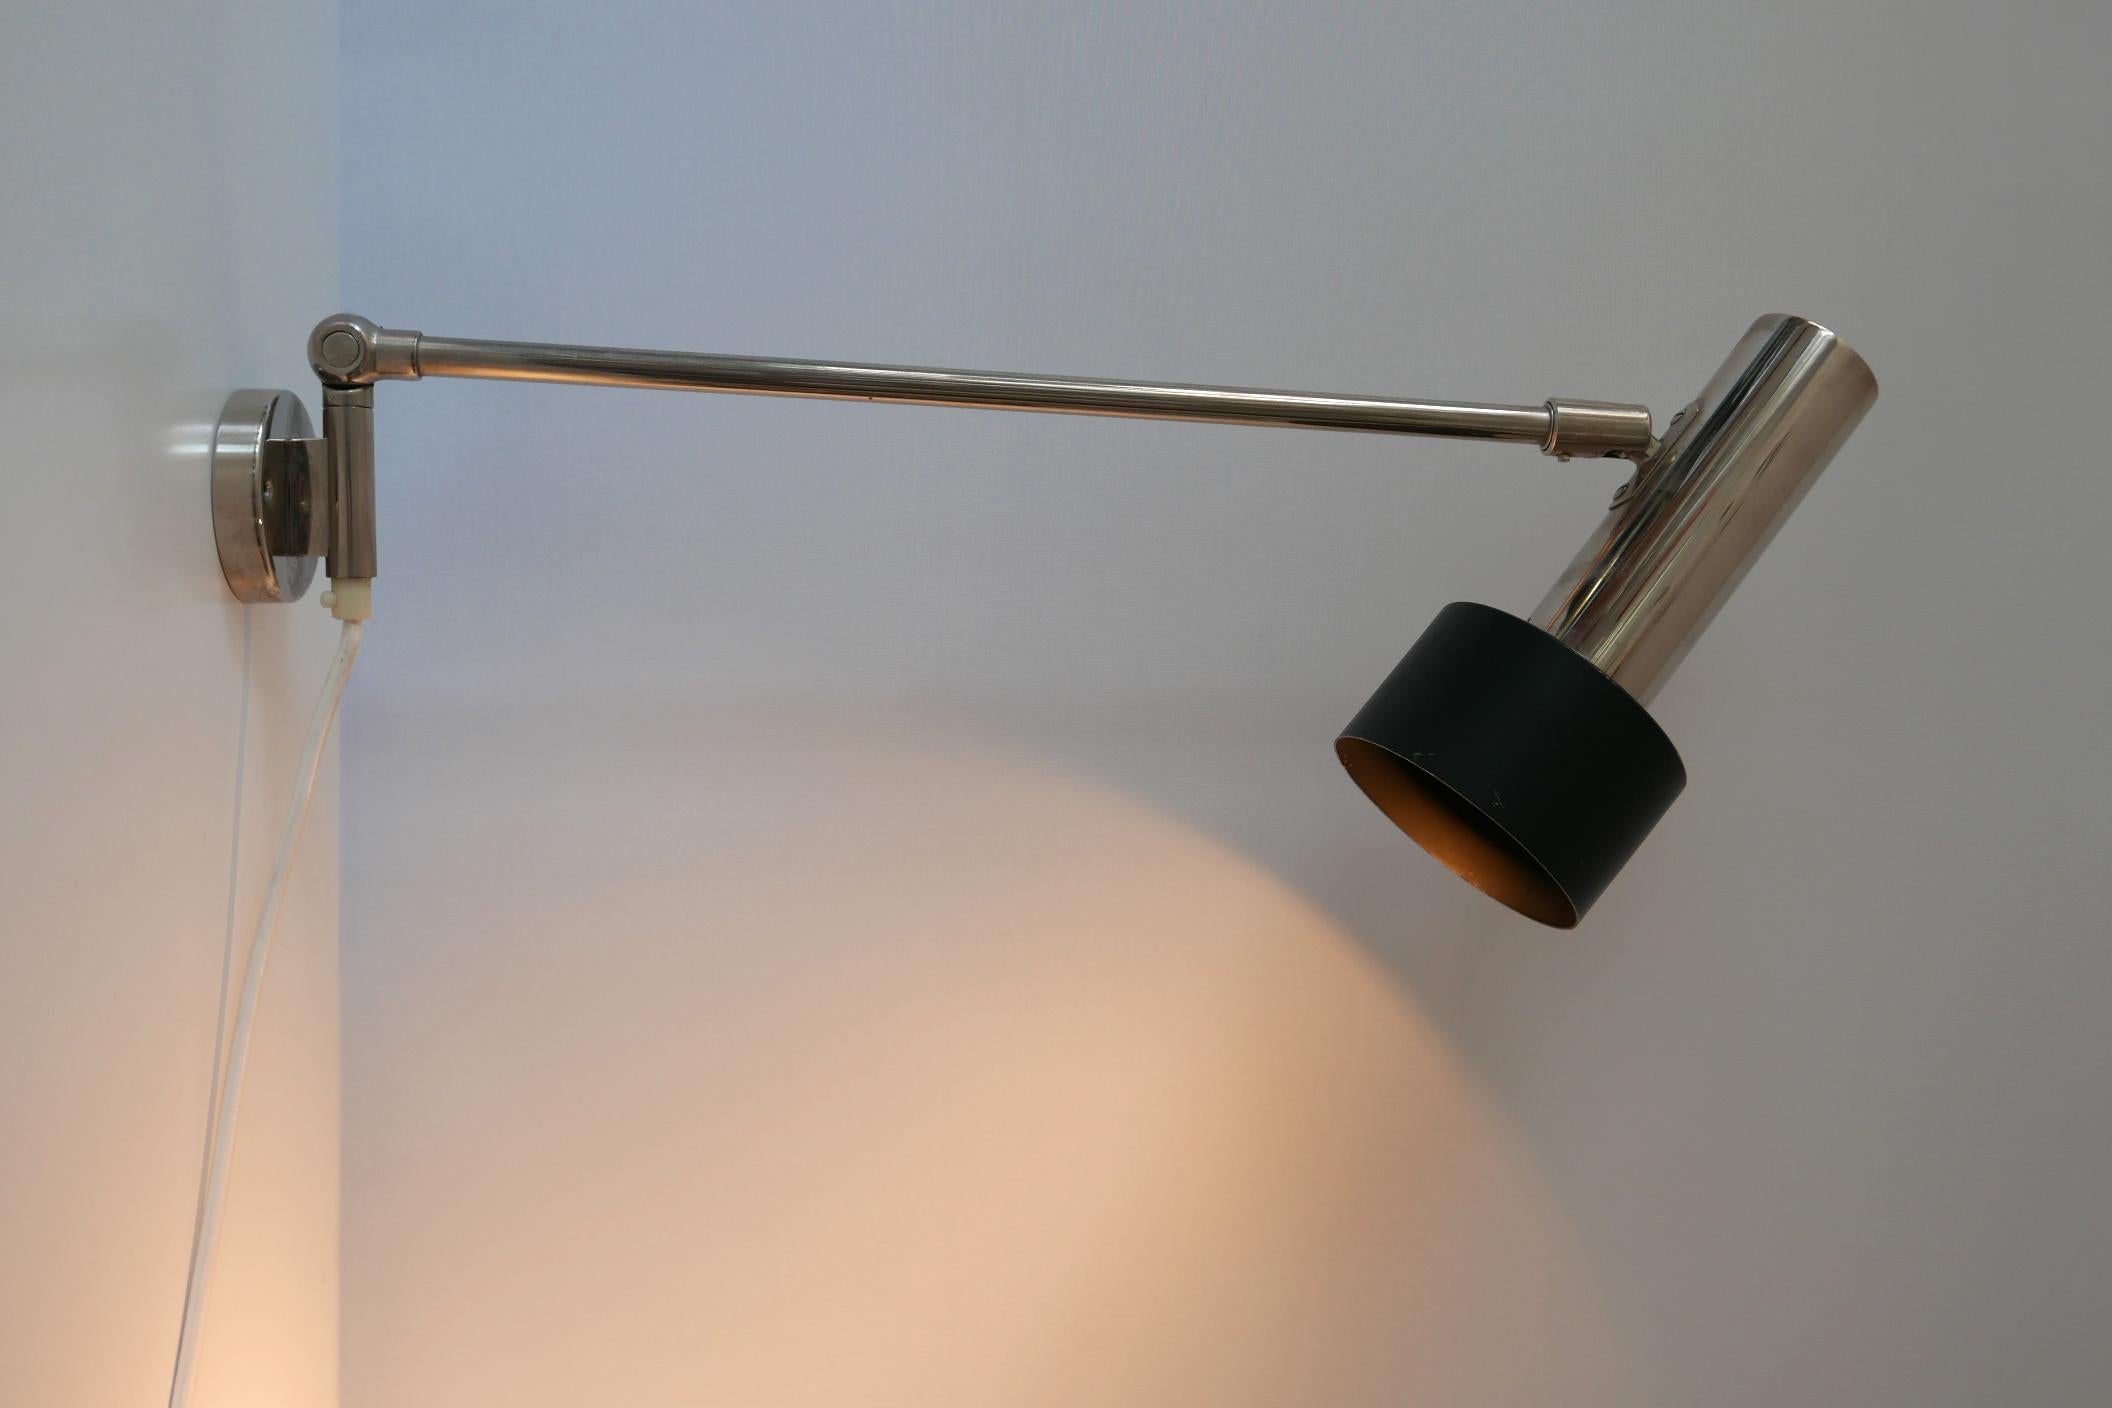 Mid-20th Century Mid-Century Modern Wall Lamp or Task Light by Beisl 1960s Germany For Sale